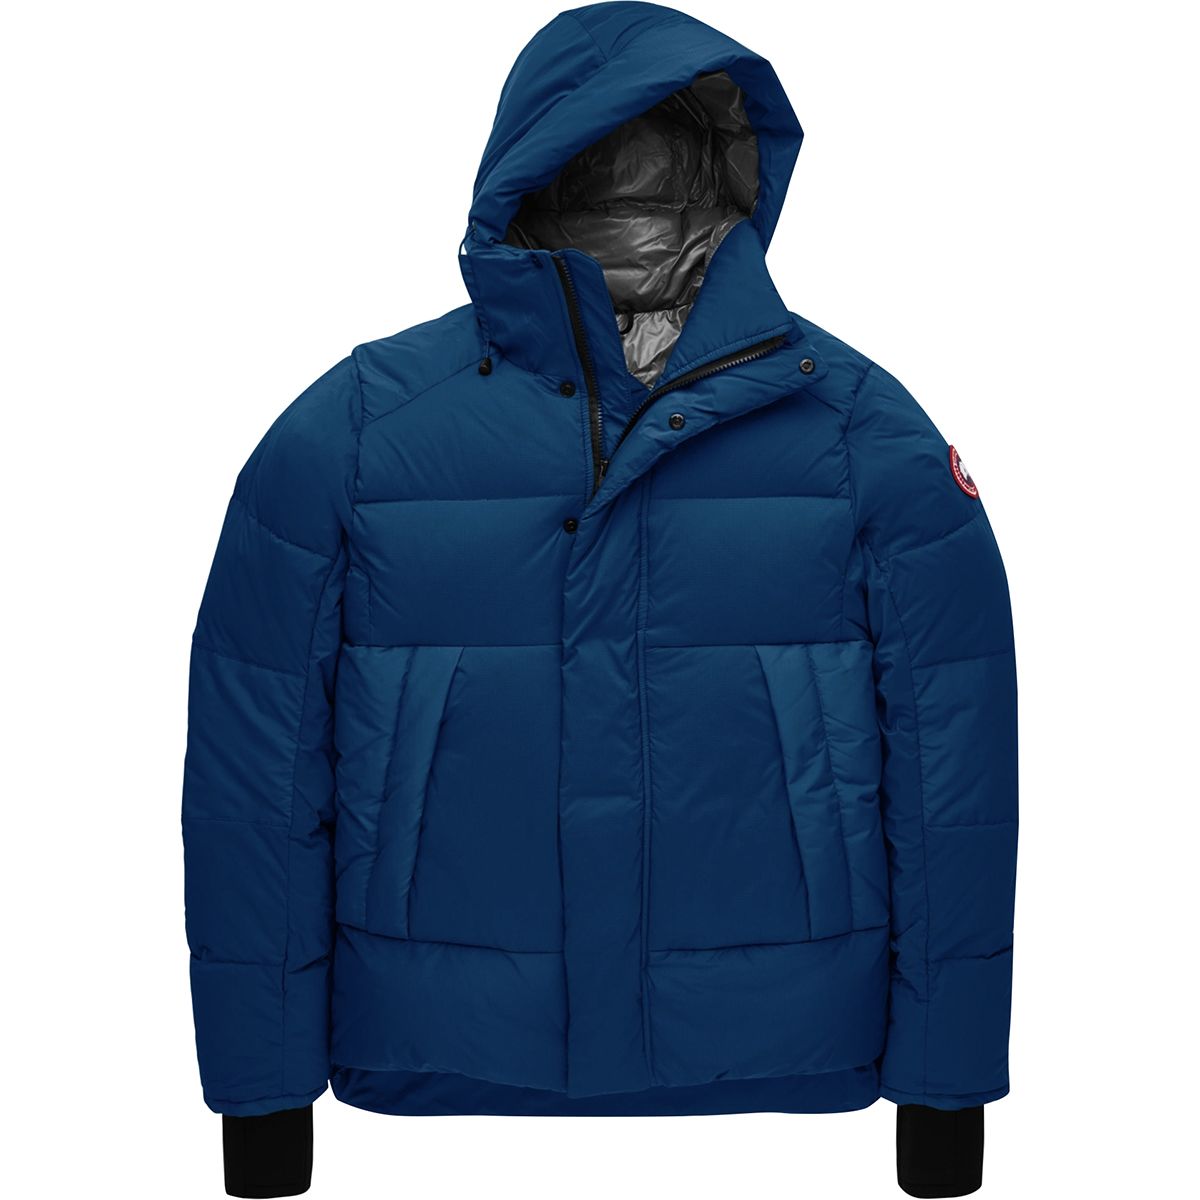 Armstrong Hooded Jacket - Men